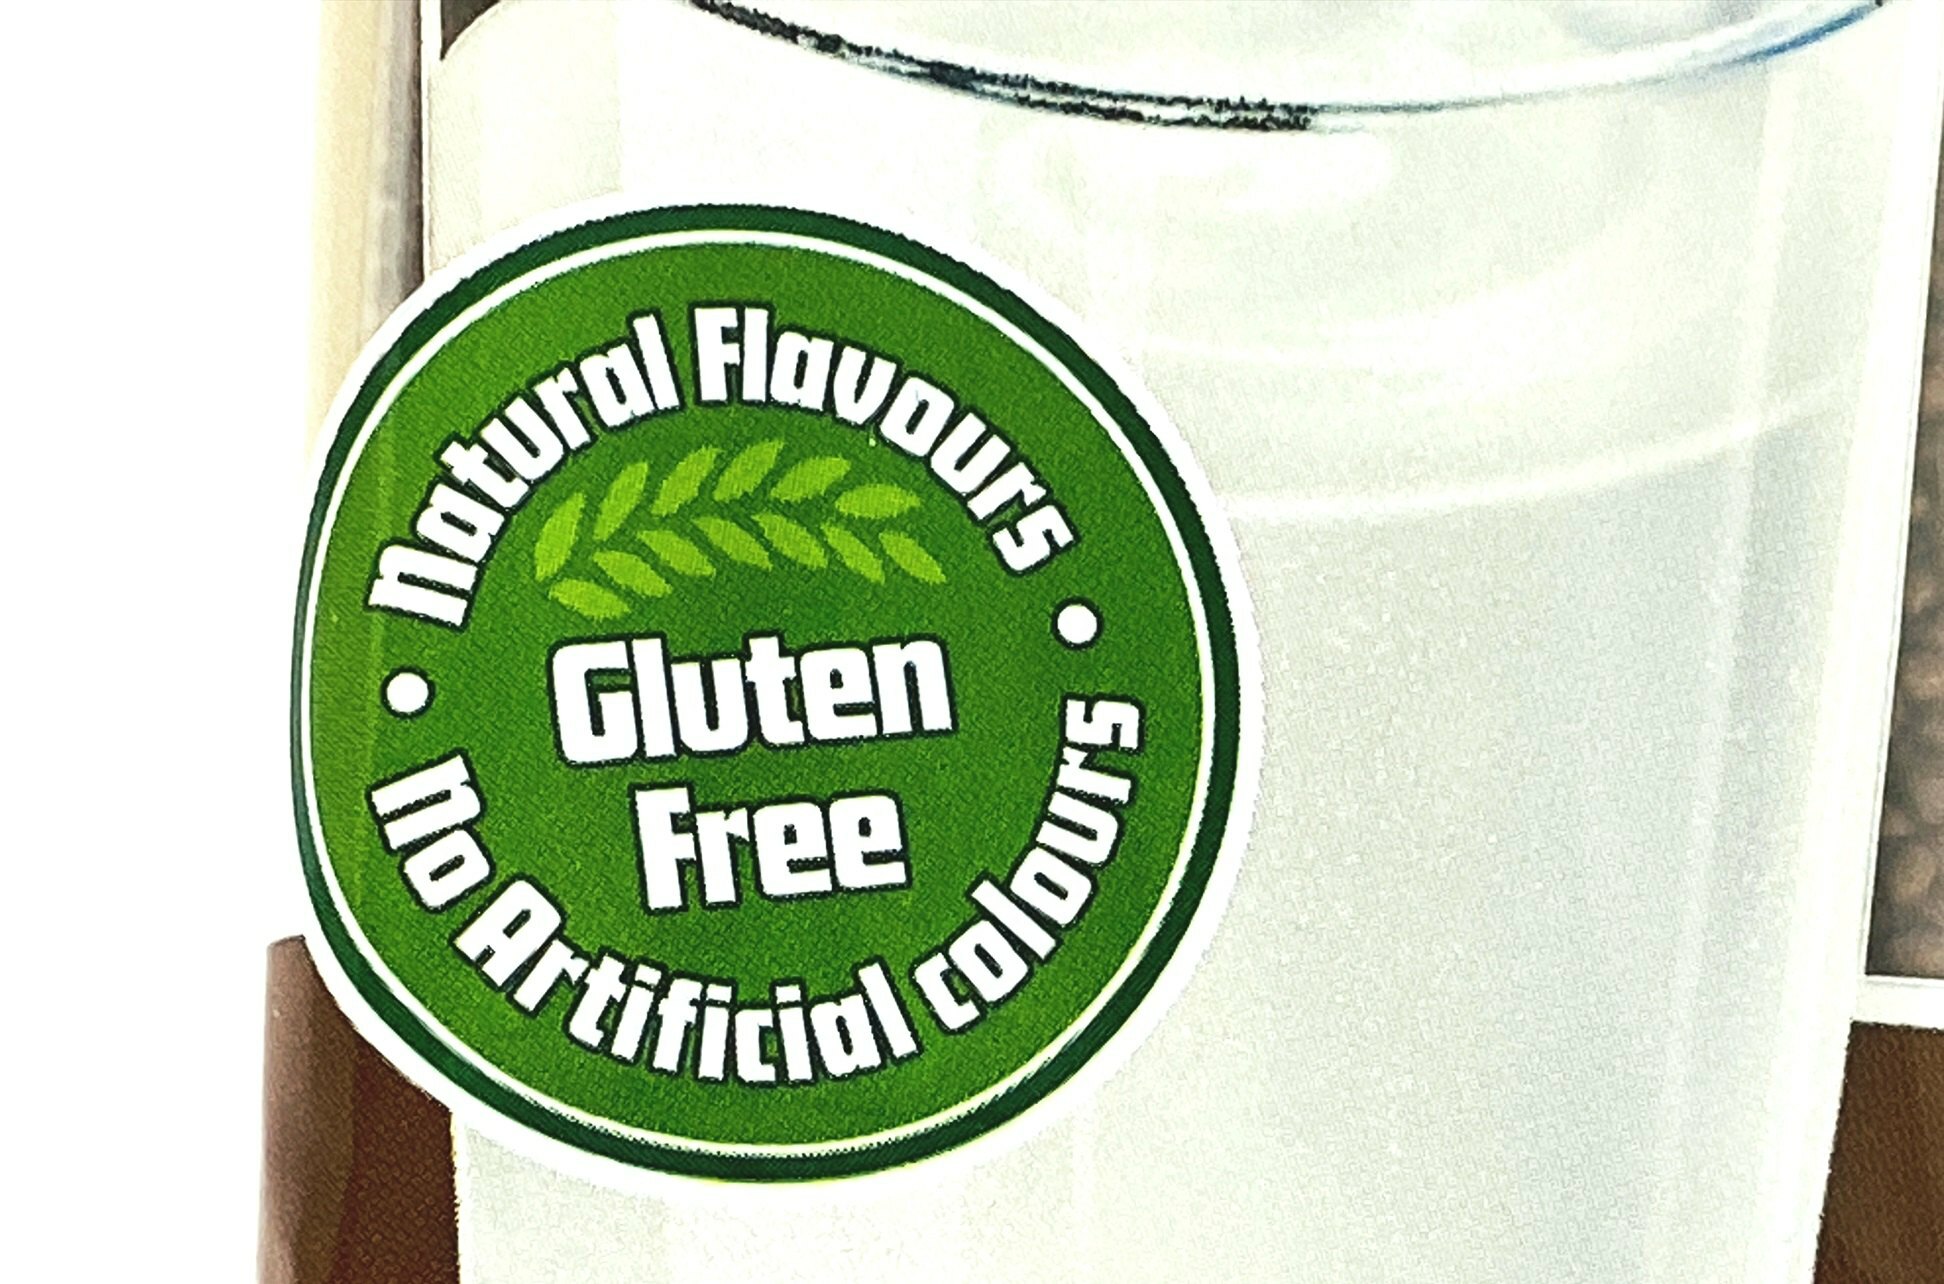 Natural Flavours, Gluten Free, No Artificial Colours.